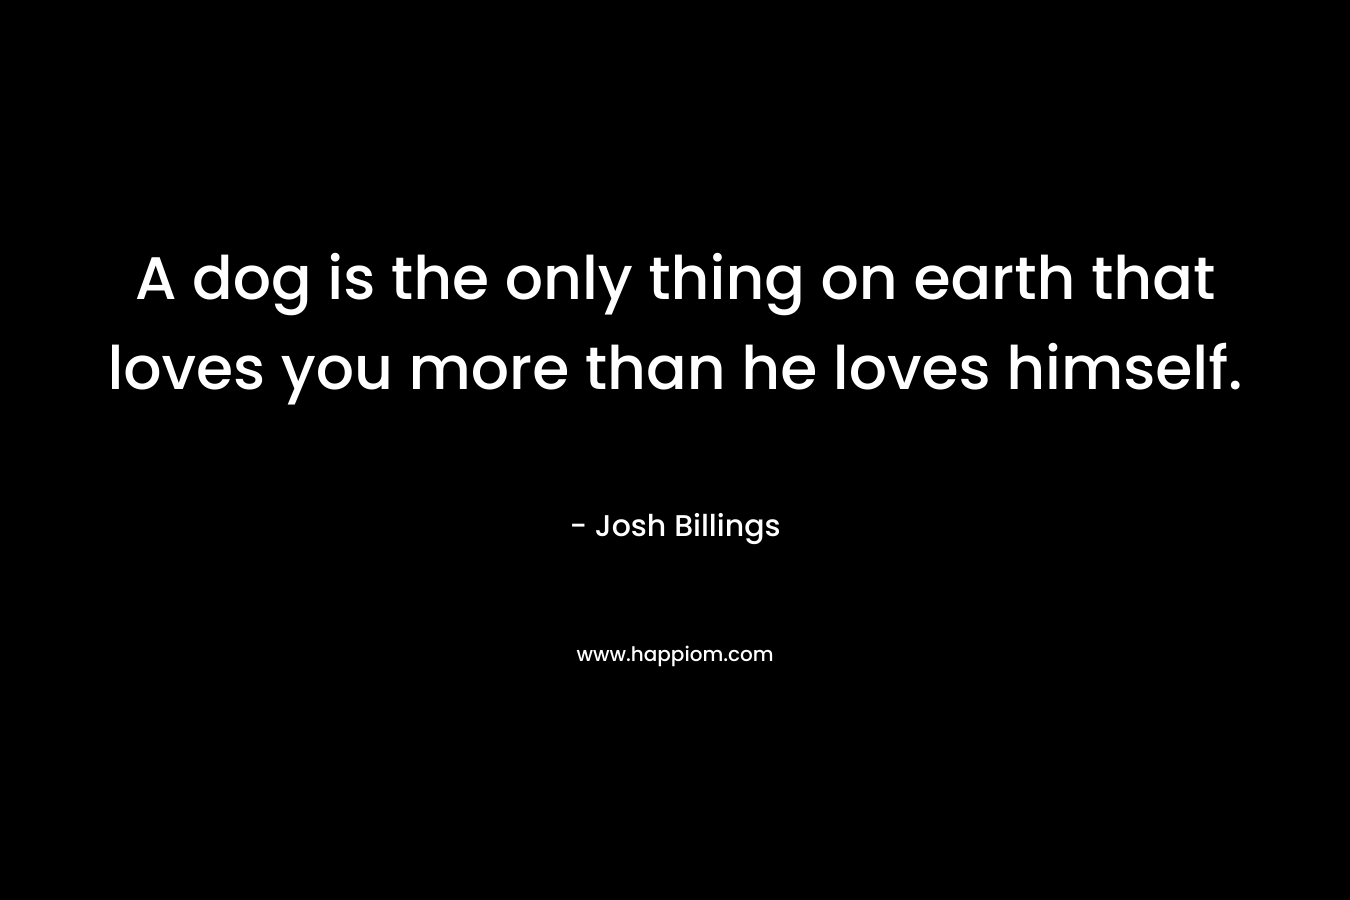 A dog is the only thing on earth that loves you more than he loves himself.